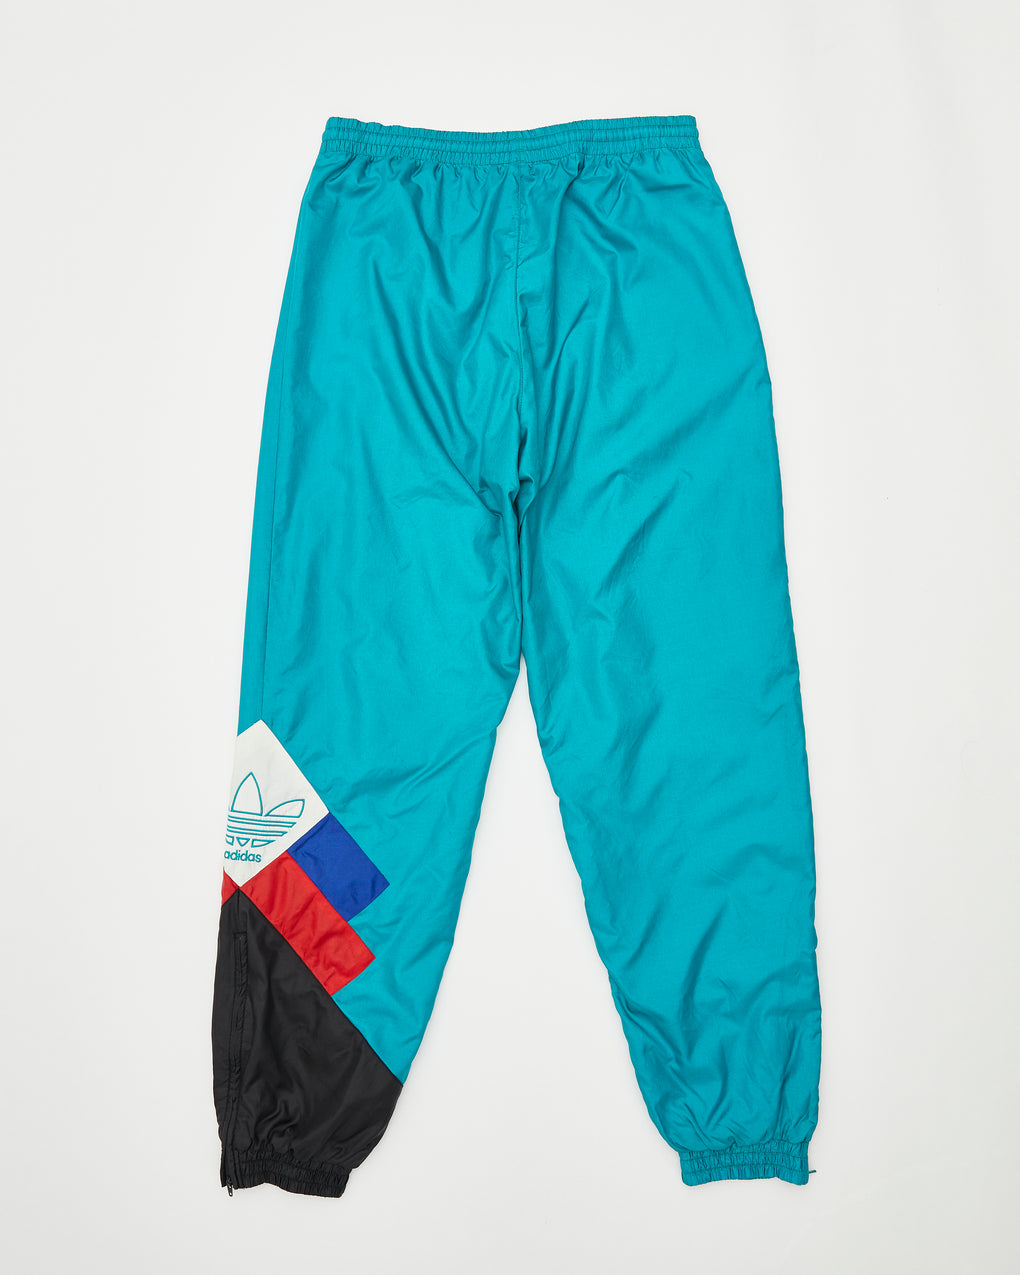 90s Adidas Turquoise Track Pants (S)